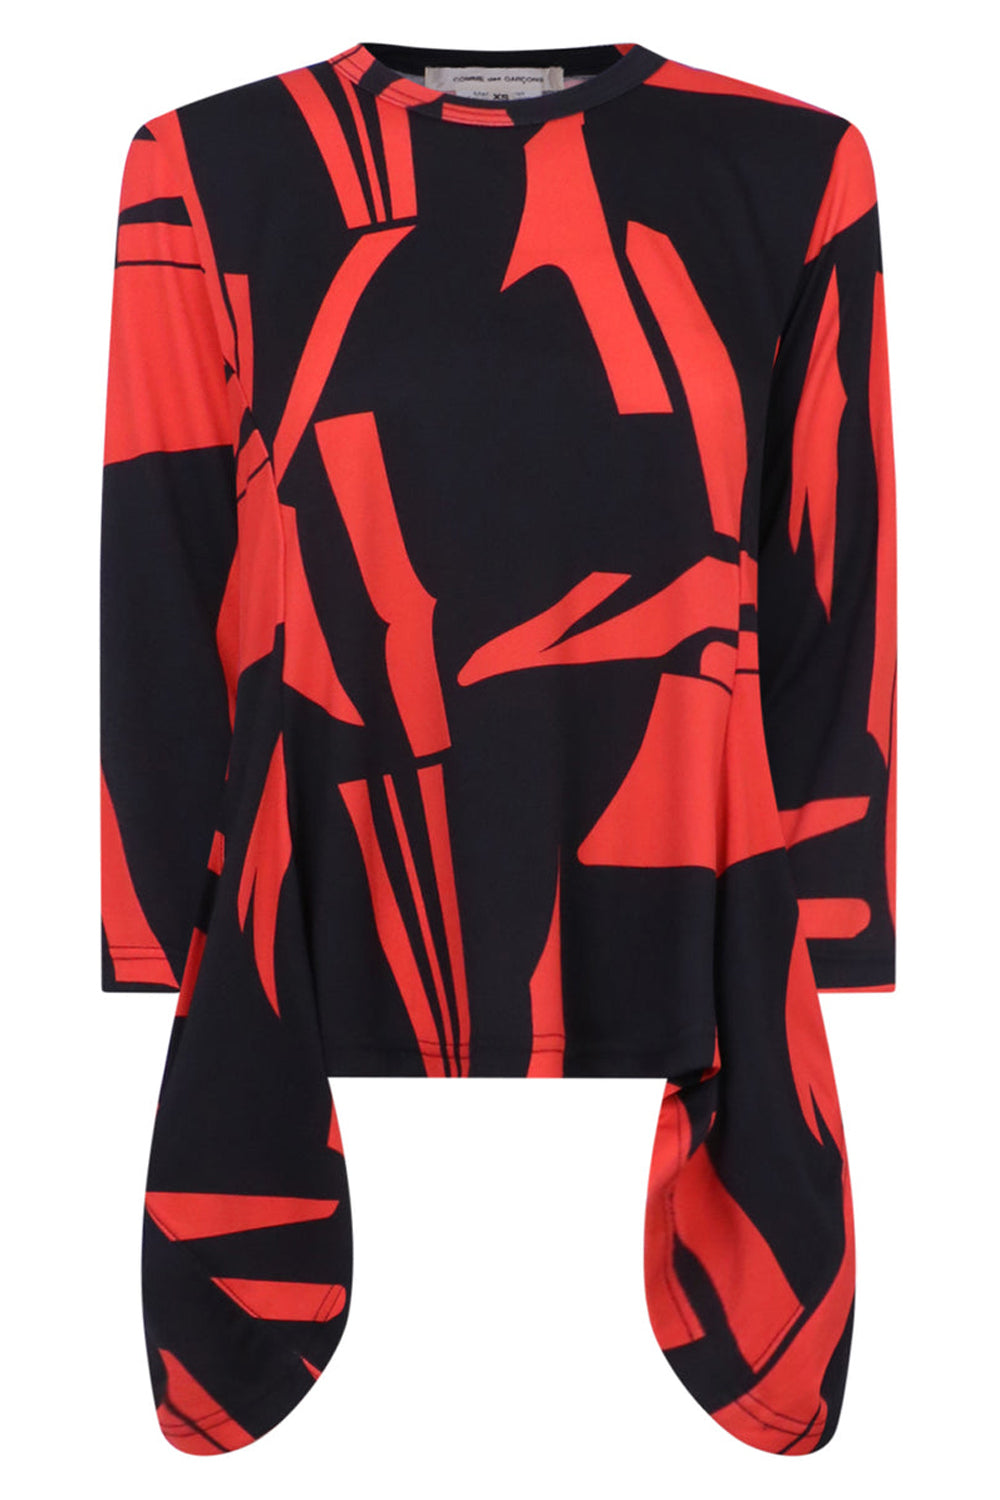 COMME DES GARCONS RTW PRINT TOP WITH DROP SIDE PANELS | BLACK/RED